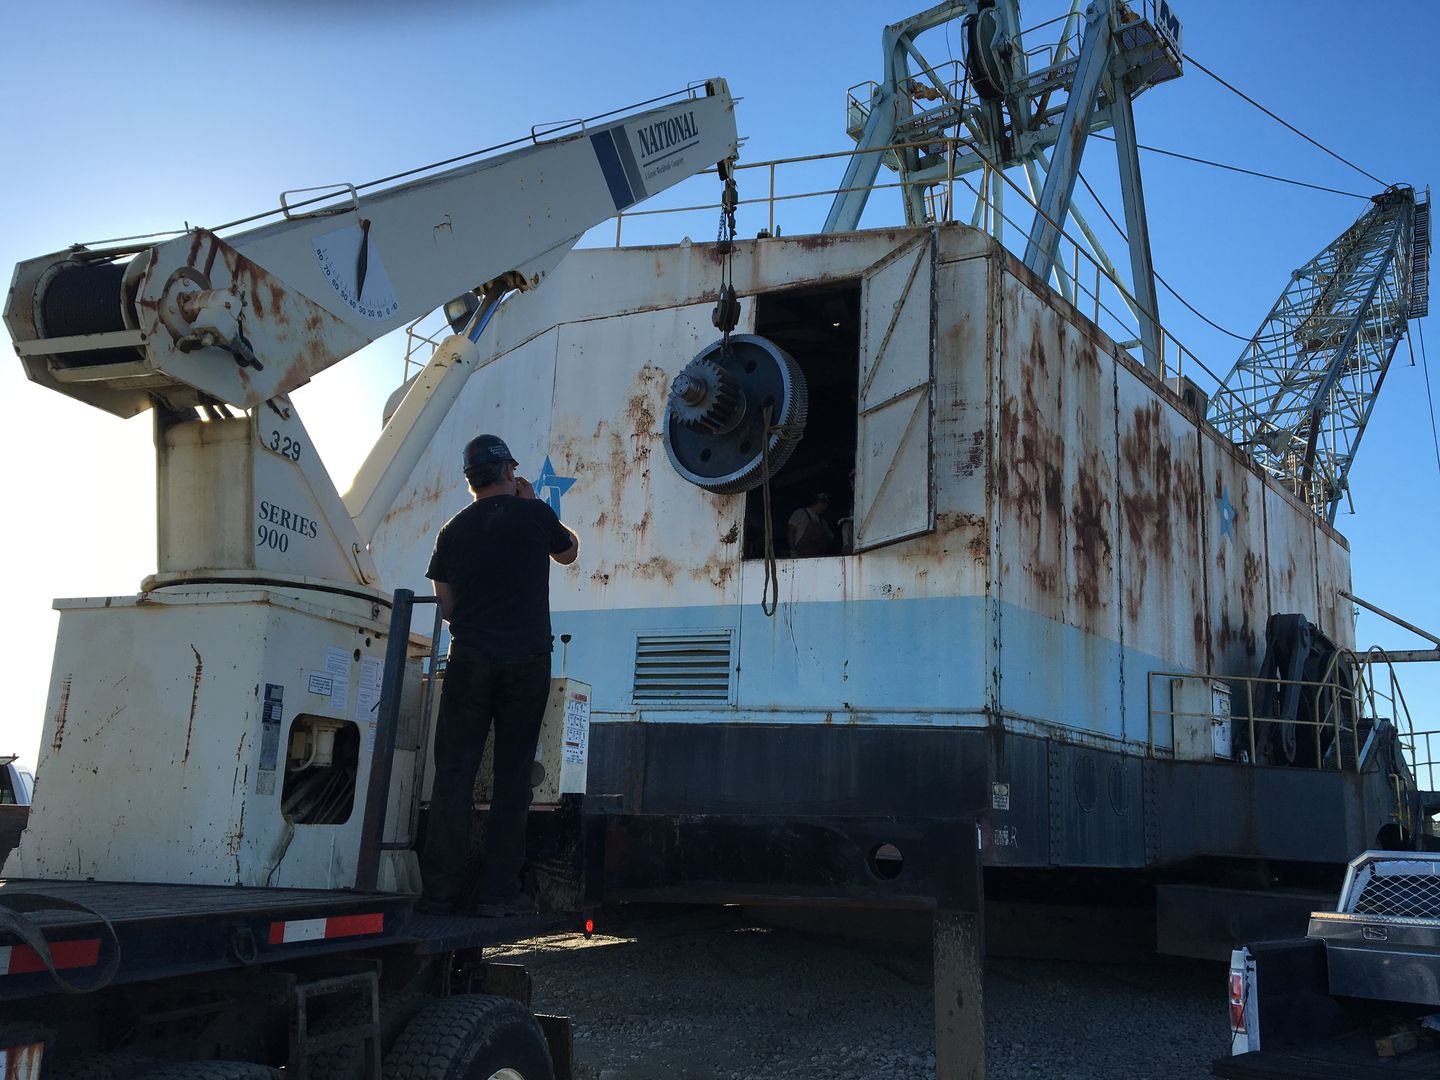 High caliber millwrights and Crane Services